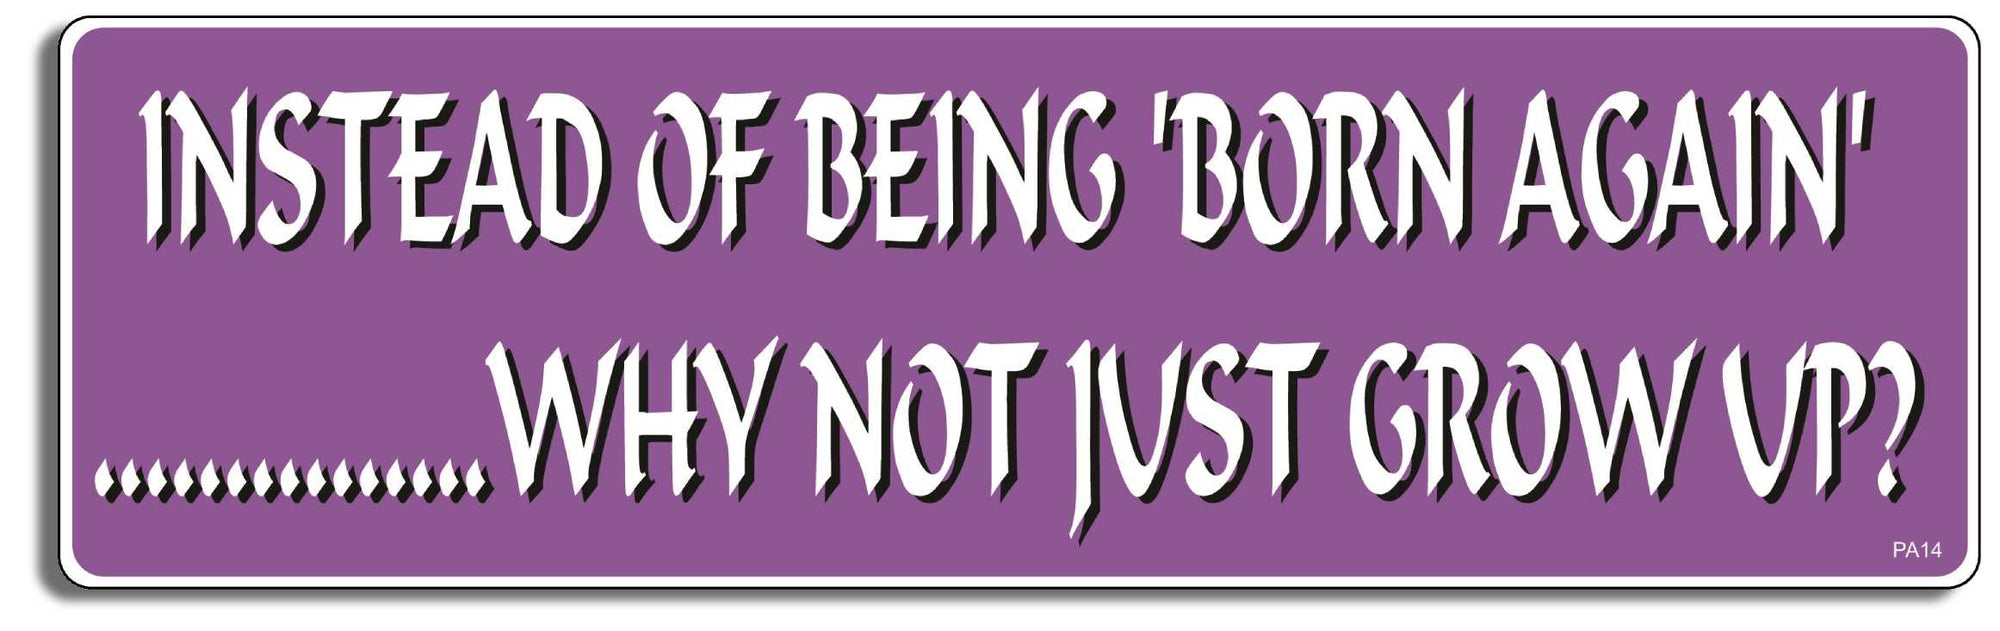 Instead of being 'Born again', why not just grow up? - 3" x 10" Bumper Sticker--Car Magnet- -  Decal Bumper Sticker-pagan Bumper Sticker Car Magnet Instead of being 'Born again', why-  Decal for carsatheist, pagan, wiccan, witch